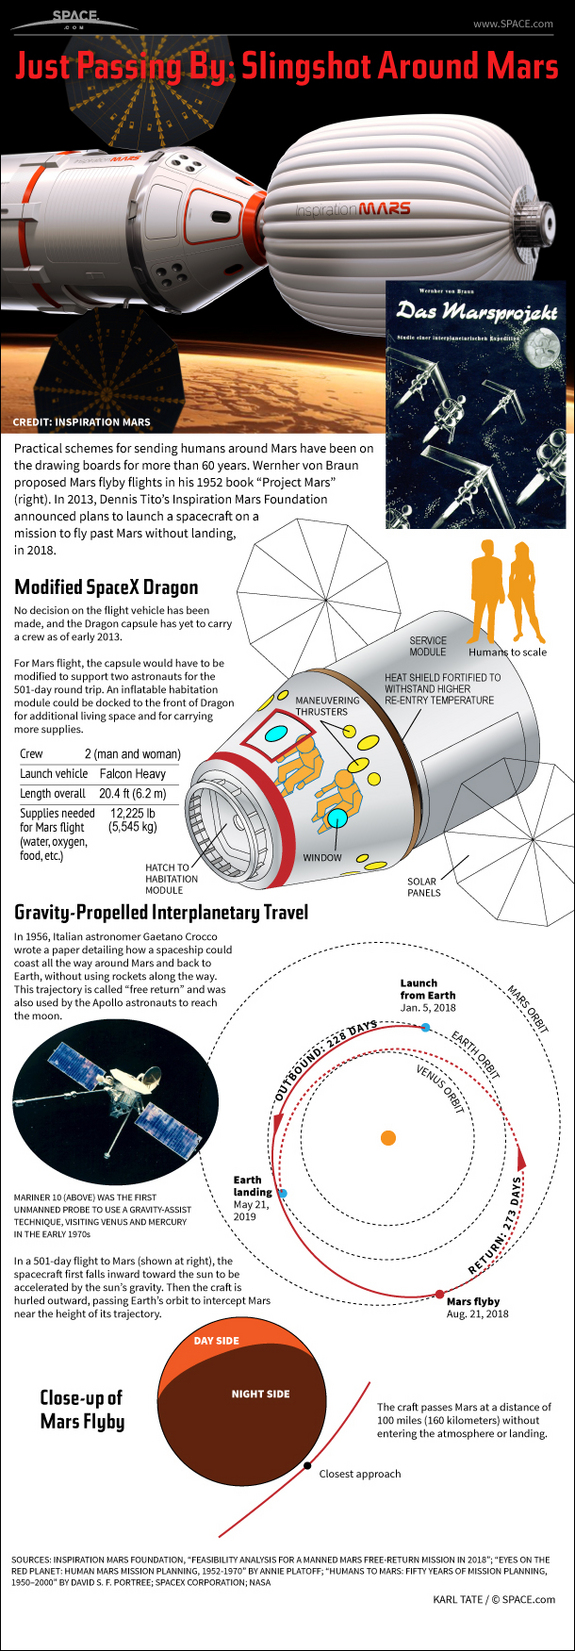 Find out about Dennis Tito's daring proposal to send a man and a woman on a 501-day space flight around the planet Mars and back, in this SPACE.com Infographic.